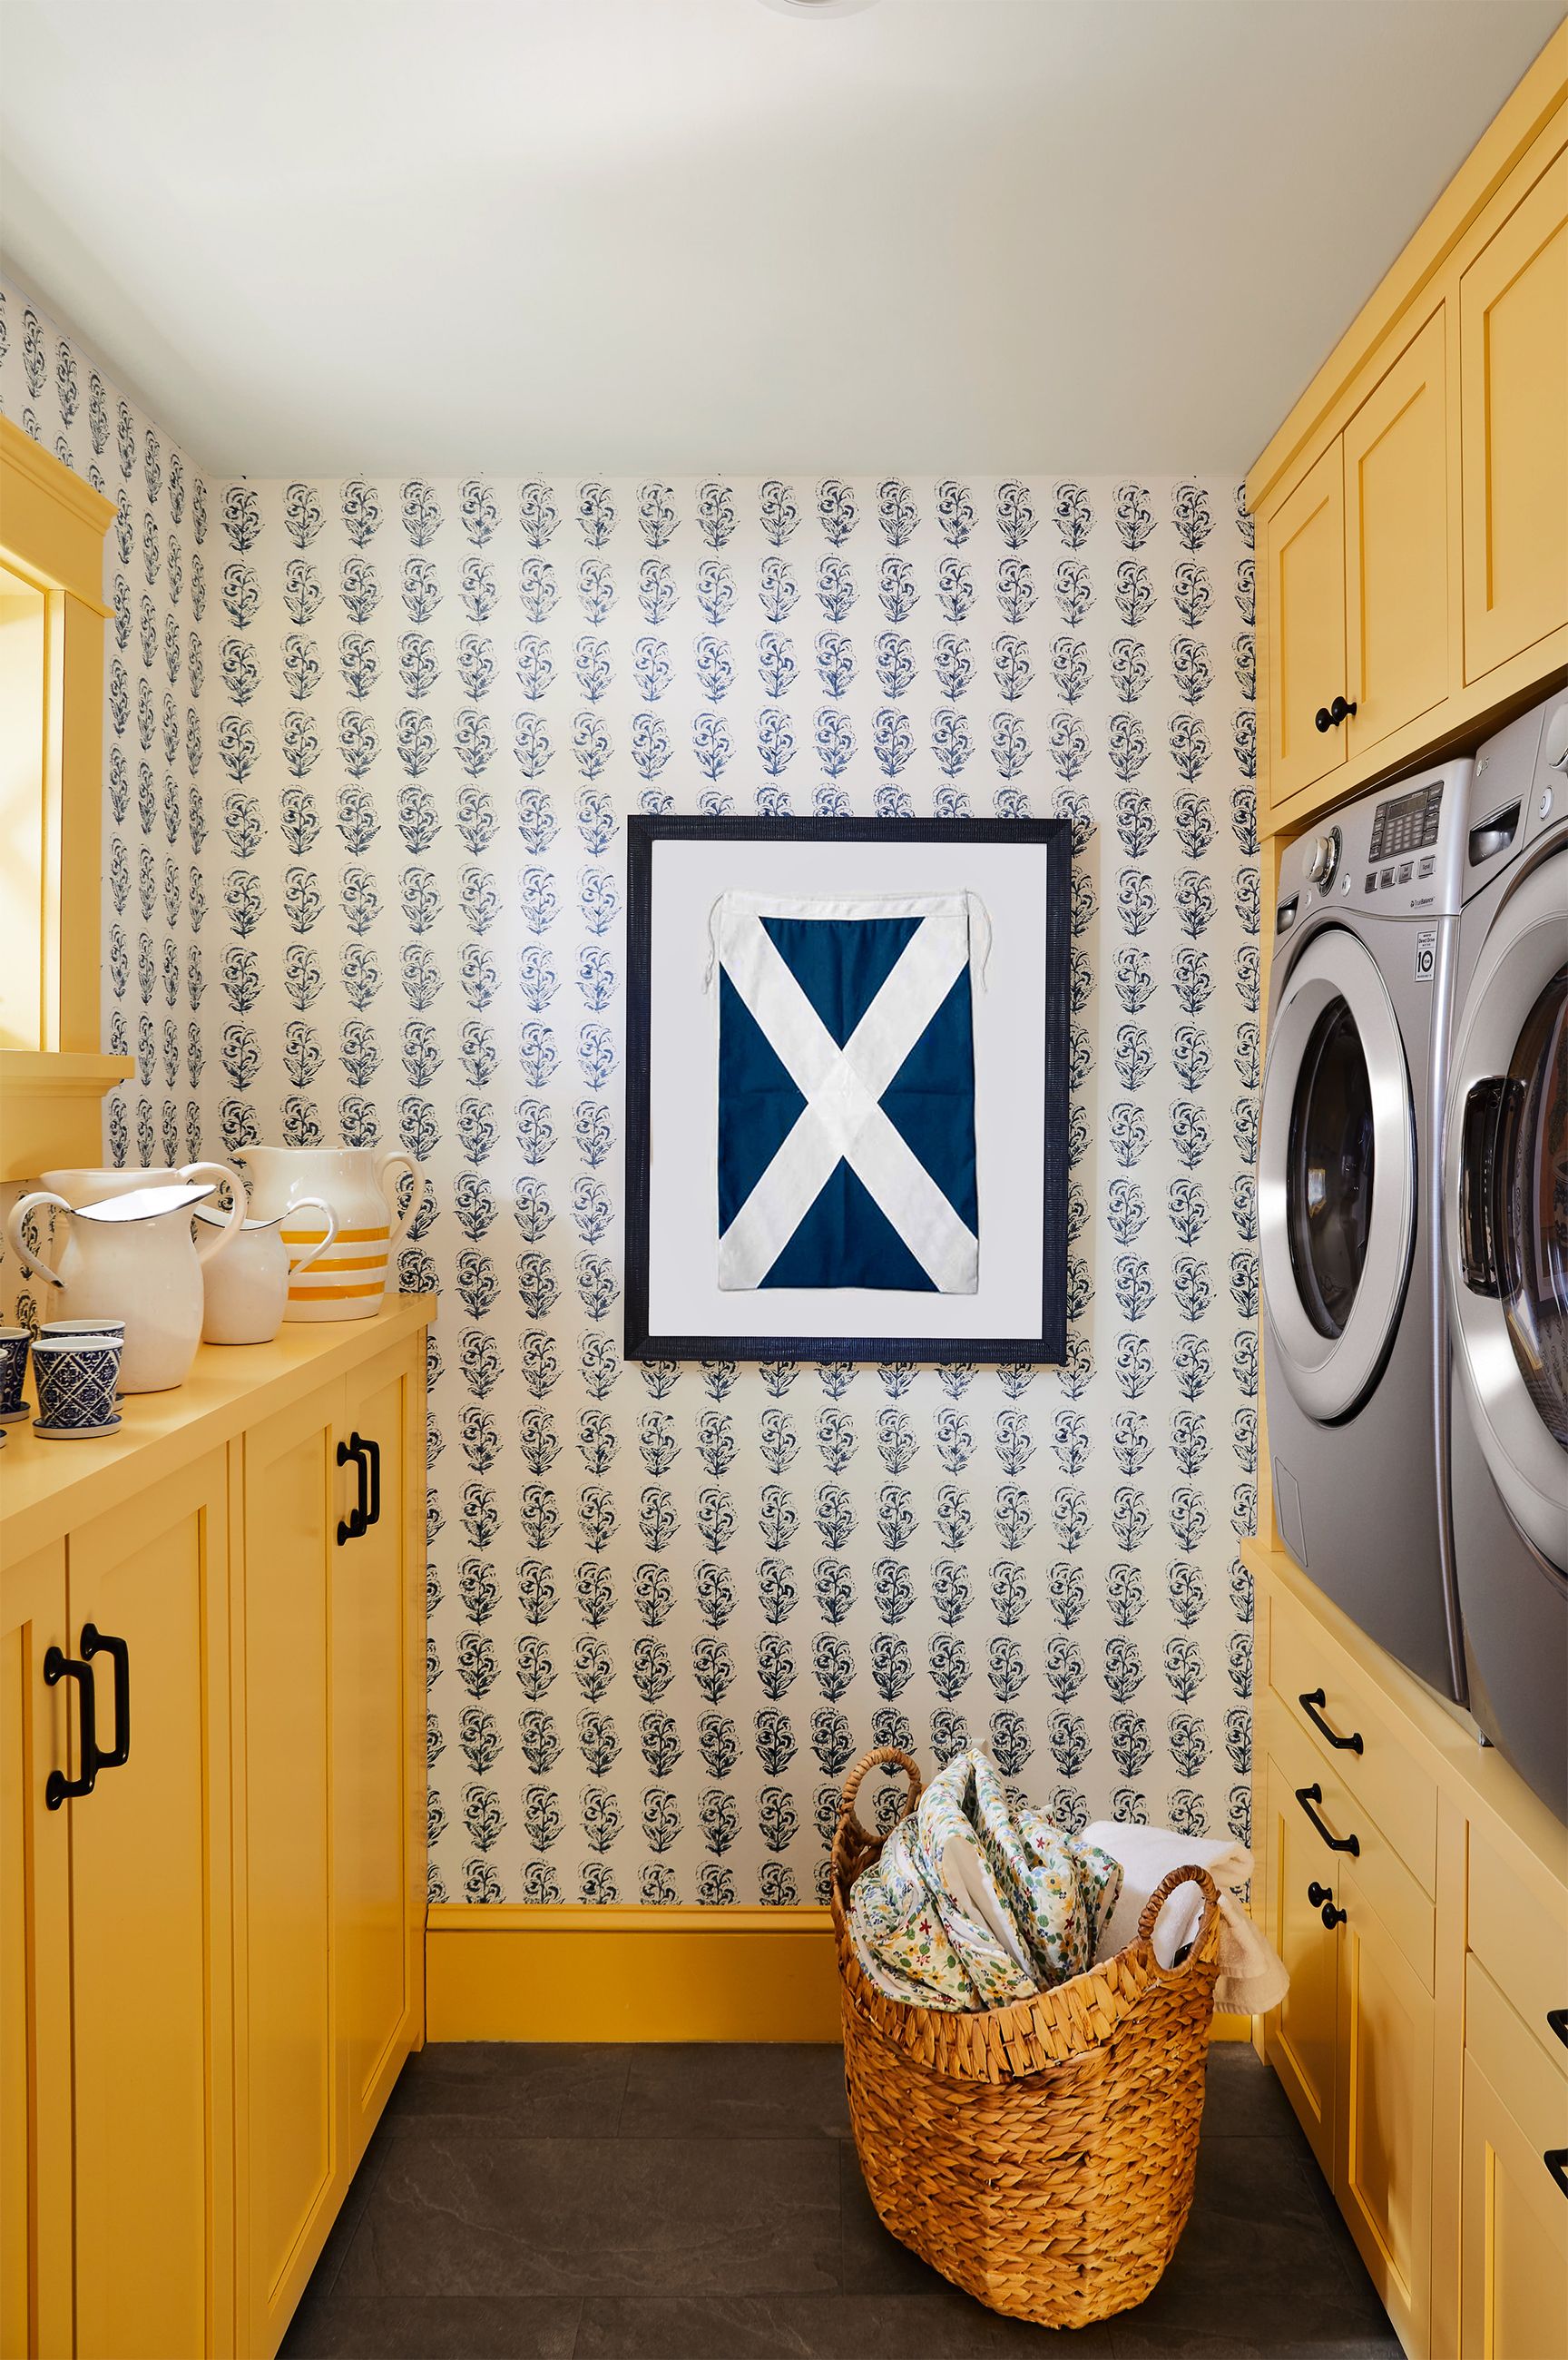 Buy Wallpaper Laundry Room Online In India  Etsy India